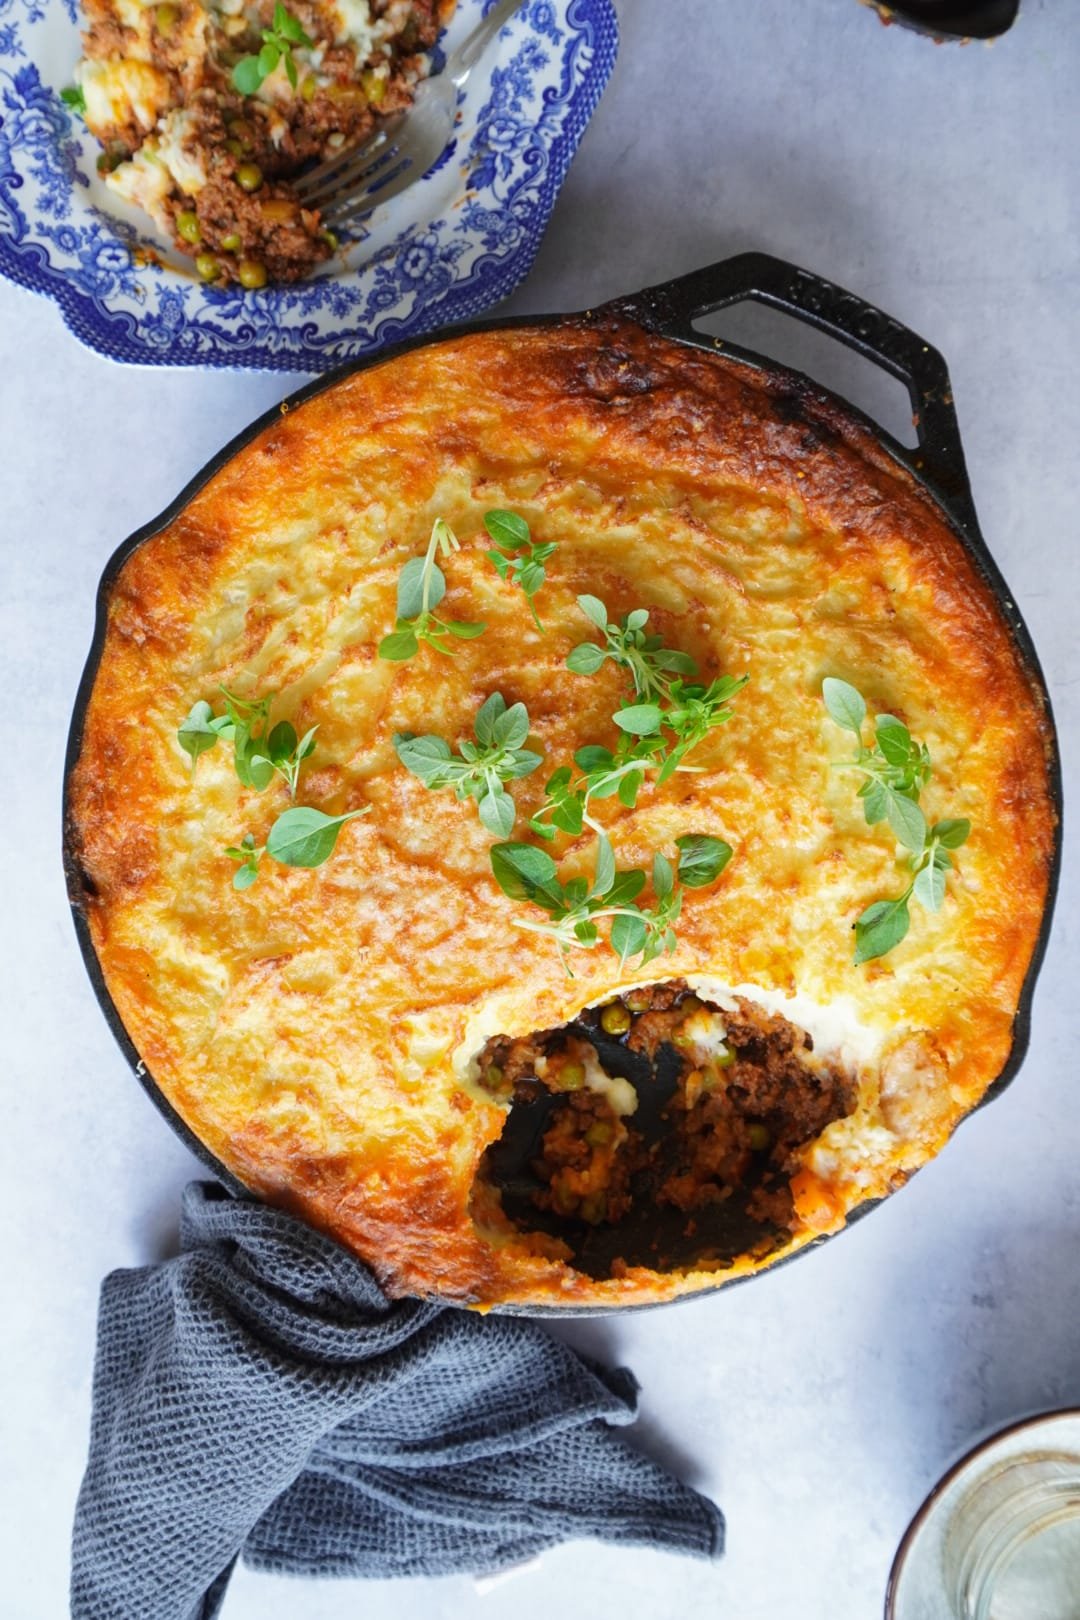 A nice and warm take on the Classic English Shepherds Pie to fill your dining table.